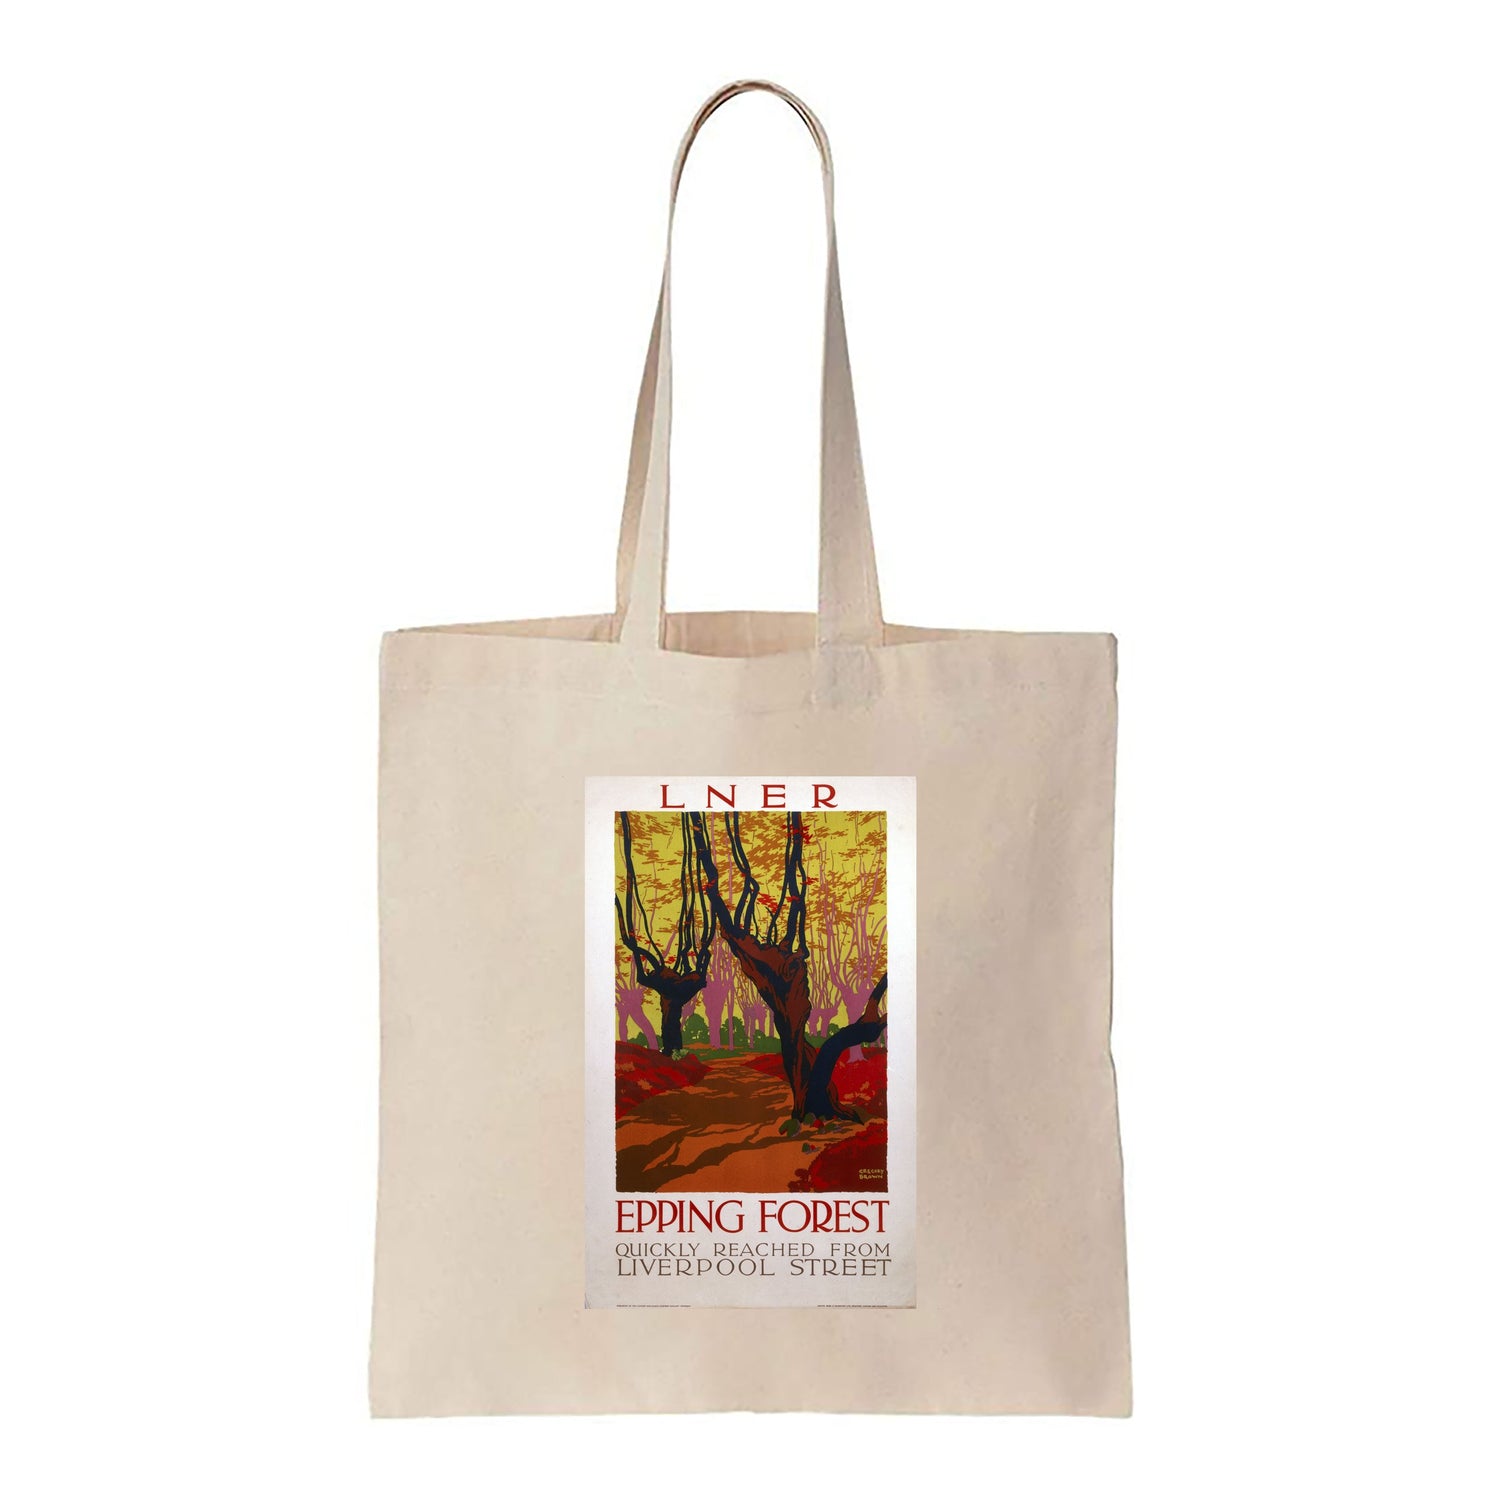 LNER, Epping Forest, Quick Reached From Liverpool Street - Canvas Tote Bag